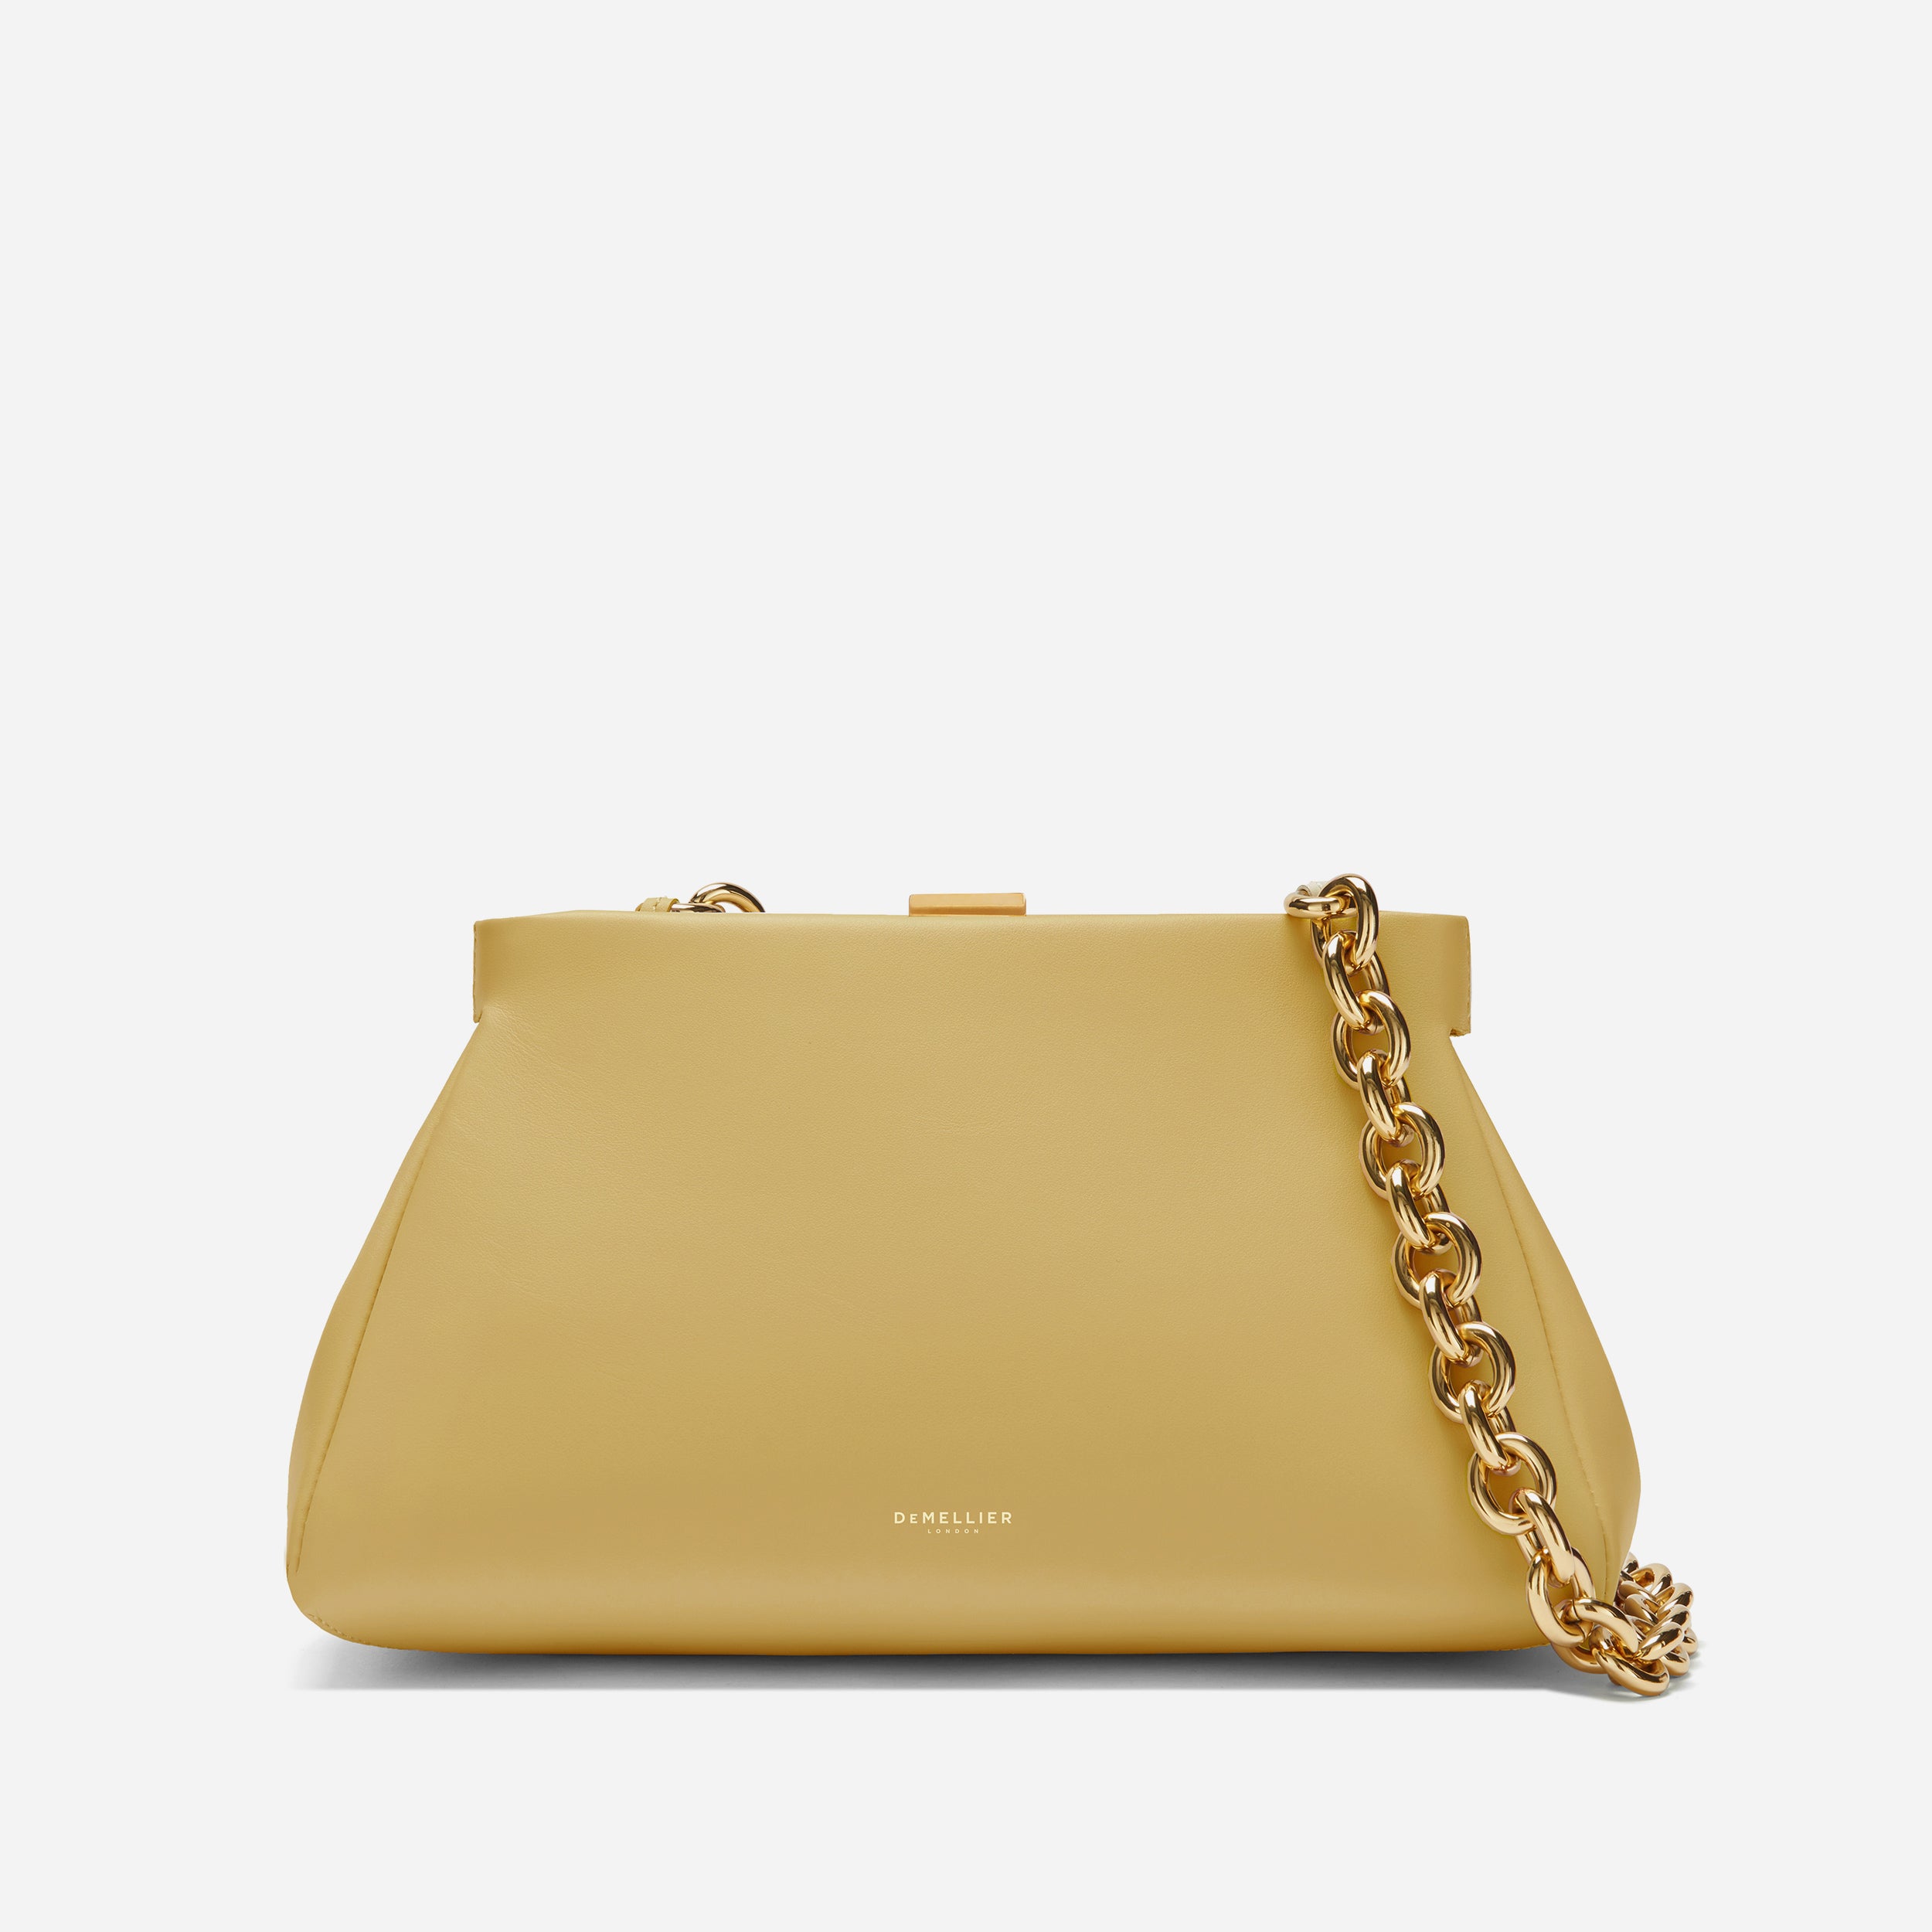 Coach Tabby Chain Leather Clutch Bag, Chalk at John Lewis & Partners